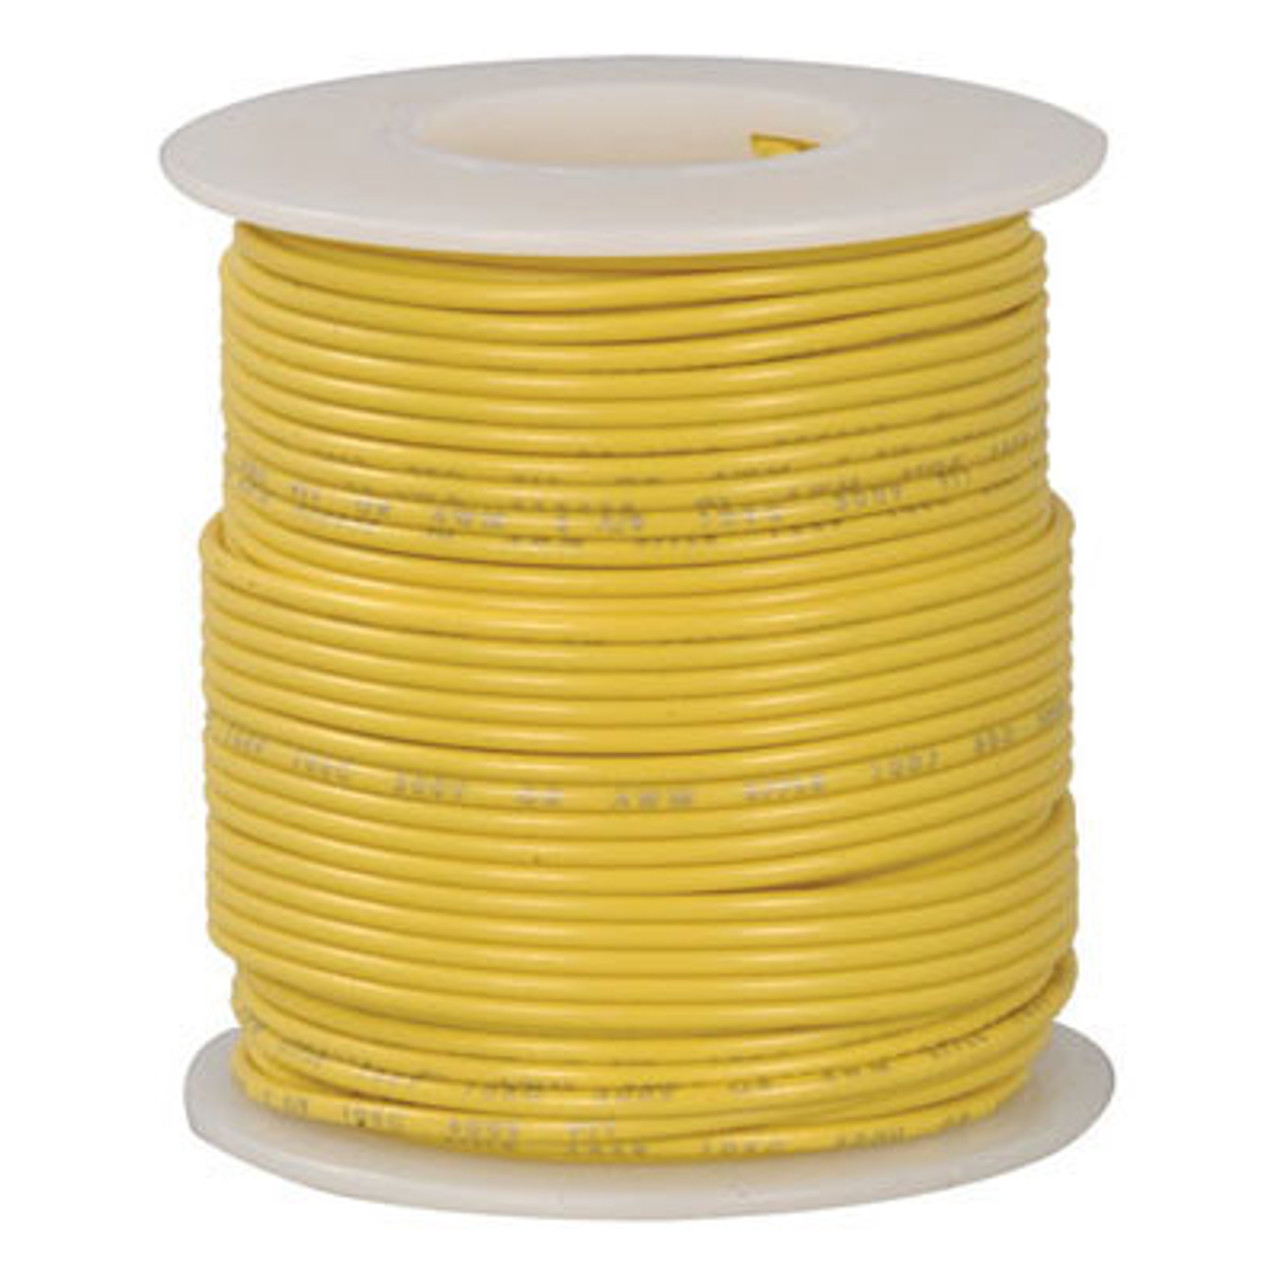 28AWG Wire 28 Gauge Stranded PVC Hookup Wire, Electrical Wire